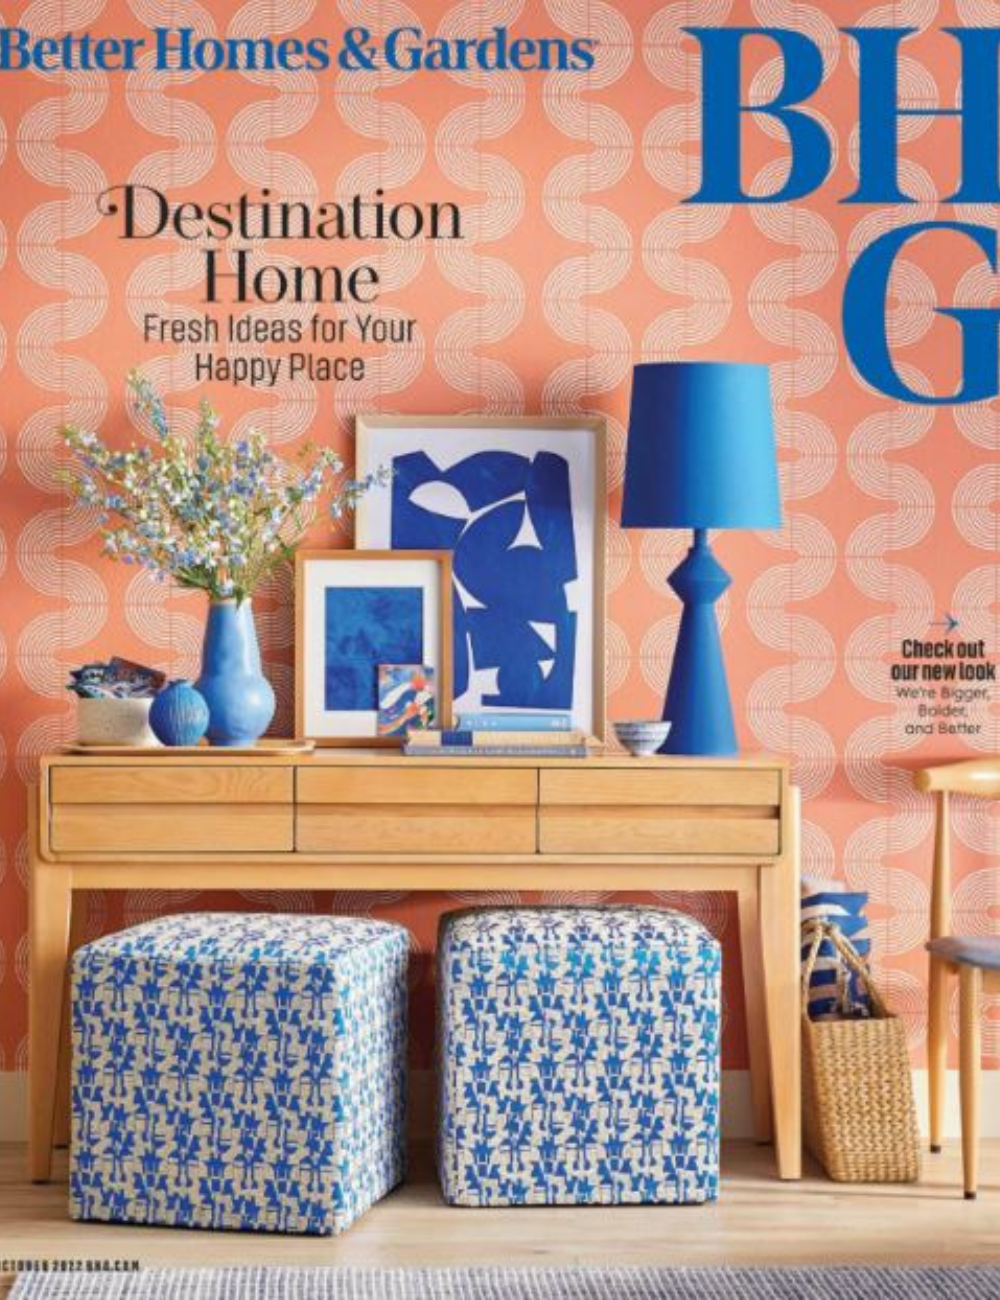 Royal Stencils Made the Cover of Better Homes & Gardens Magazine!